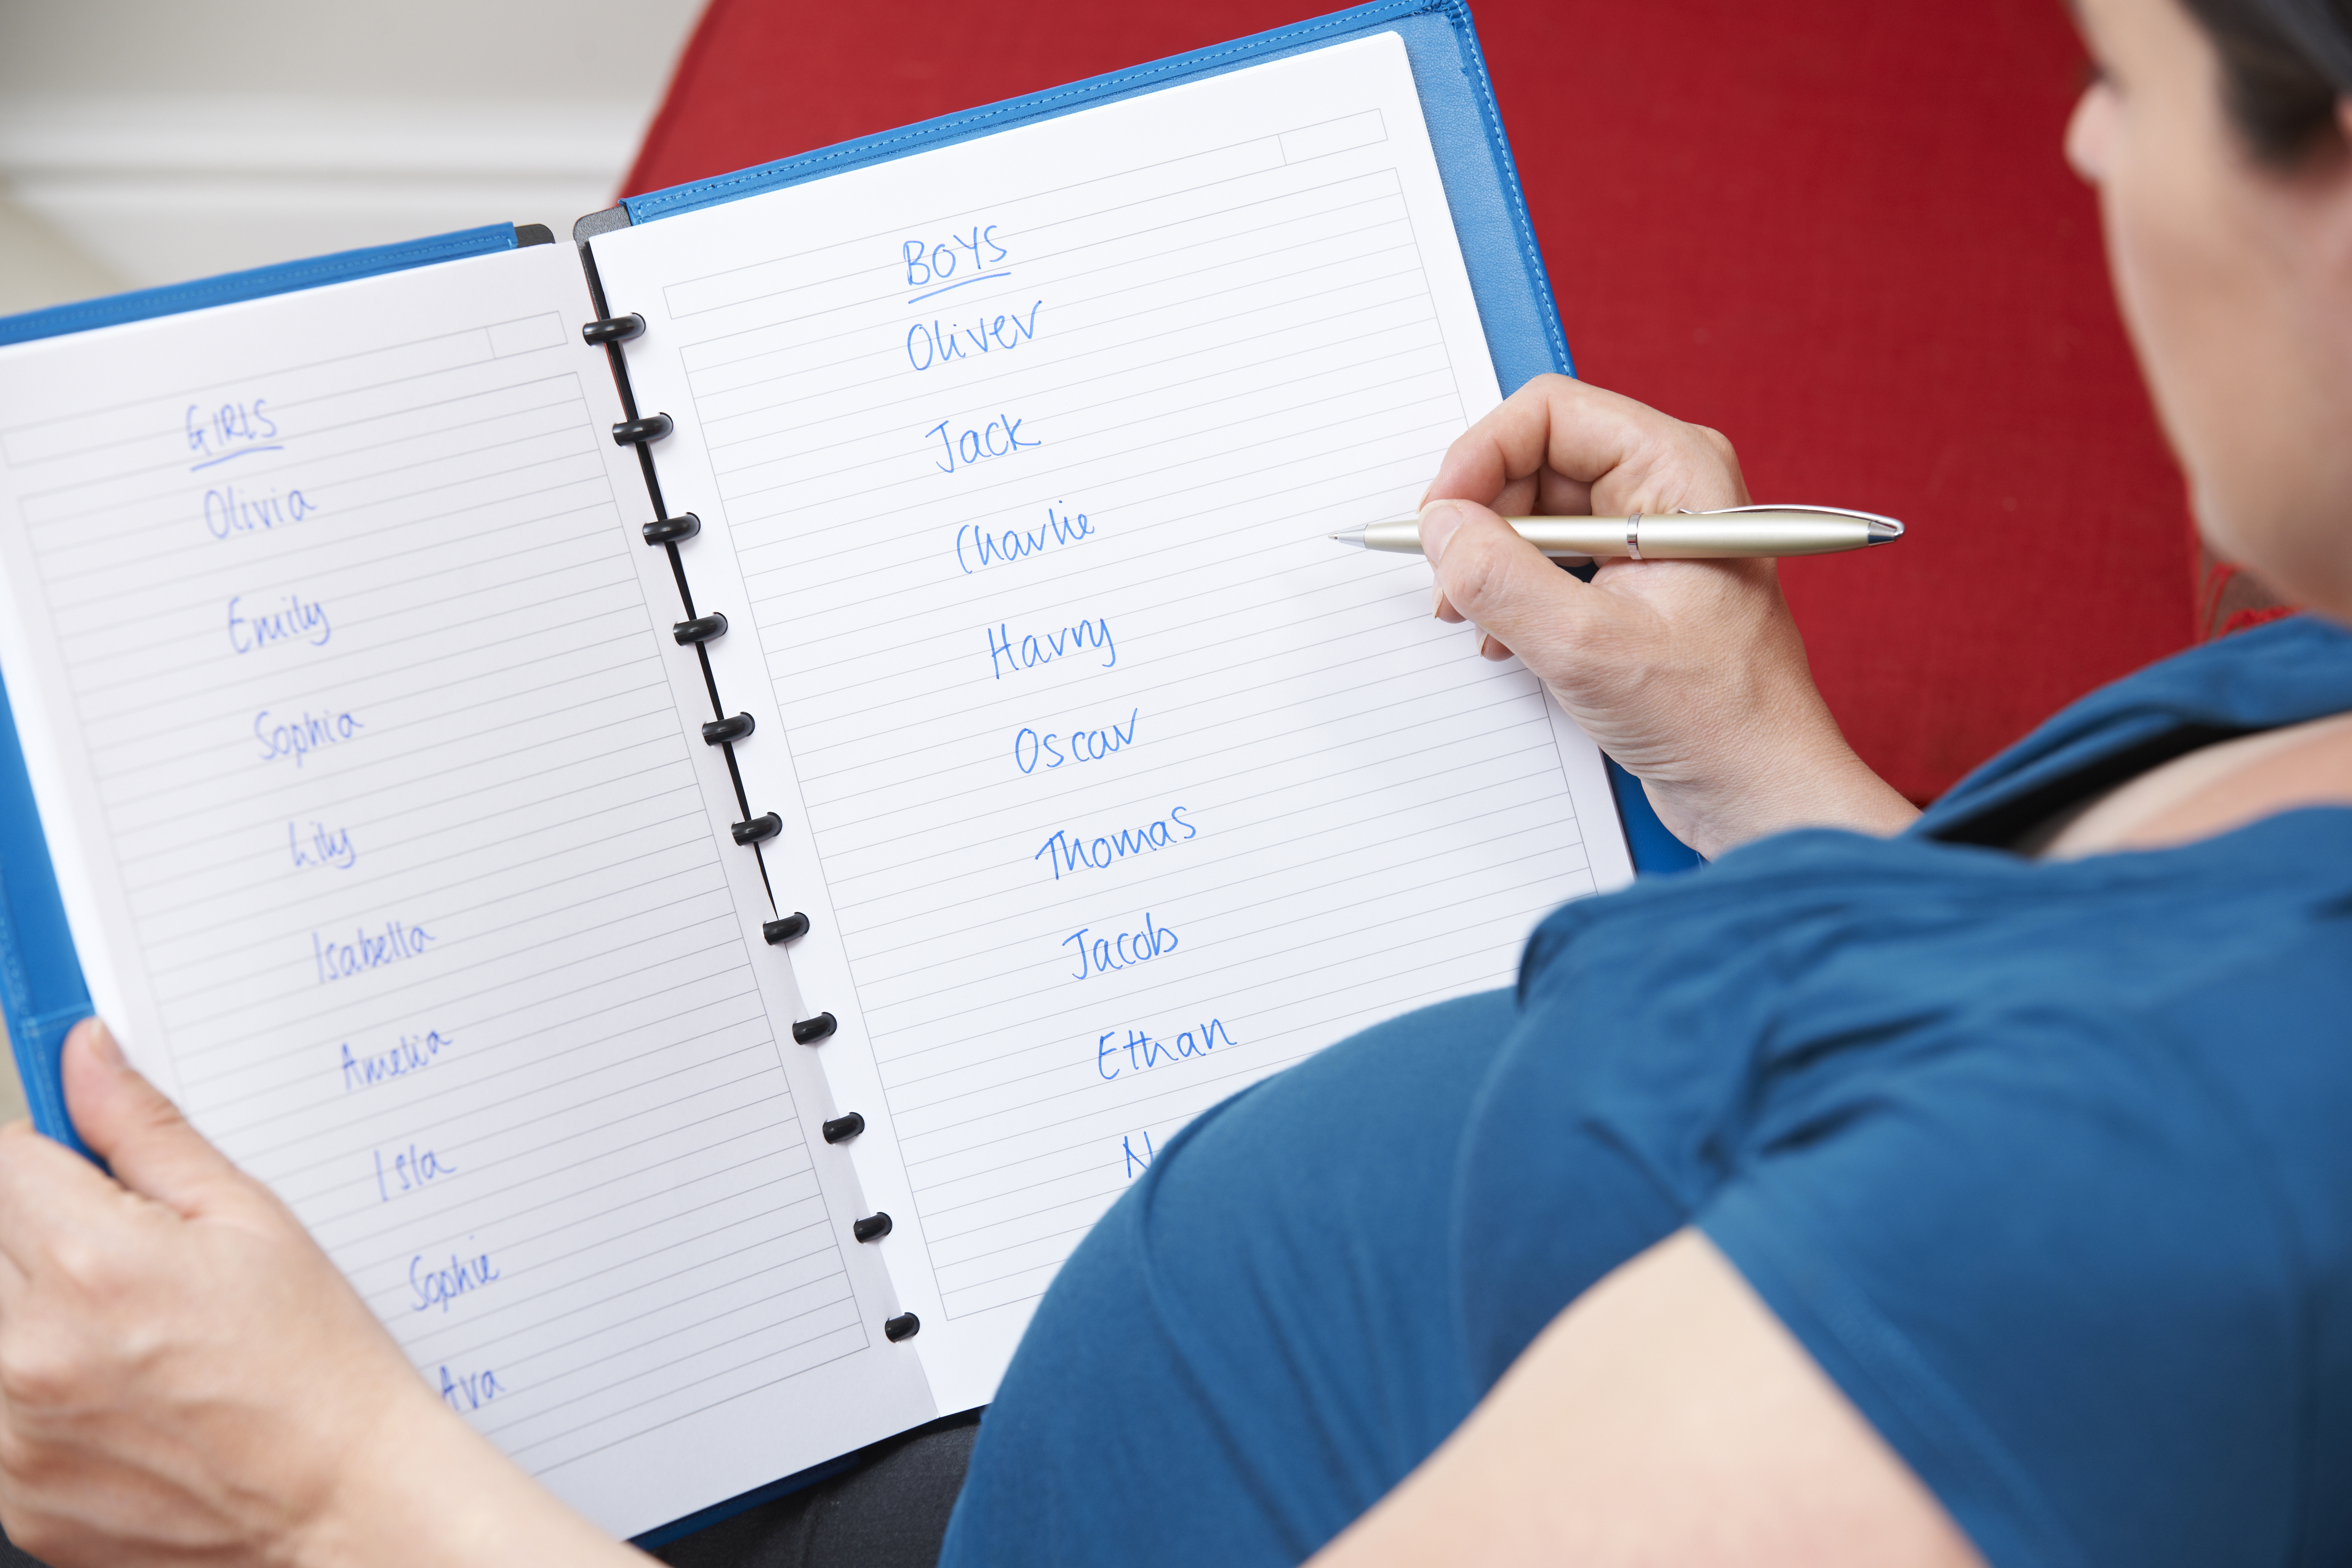 A pregnant woman writing down potential baby names | Source: Shutterstock